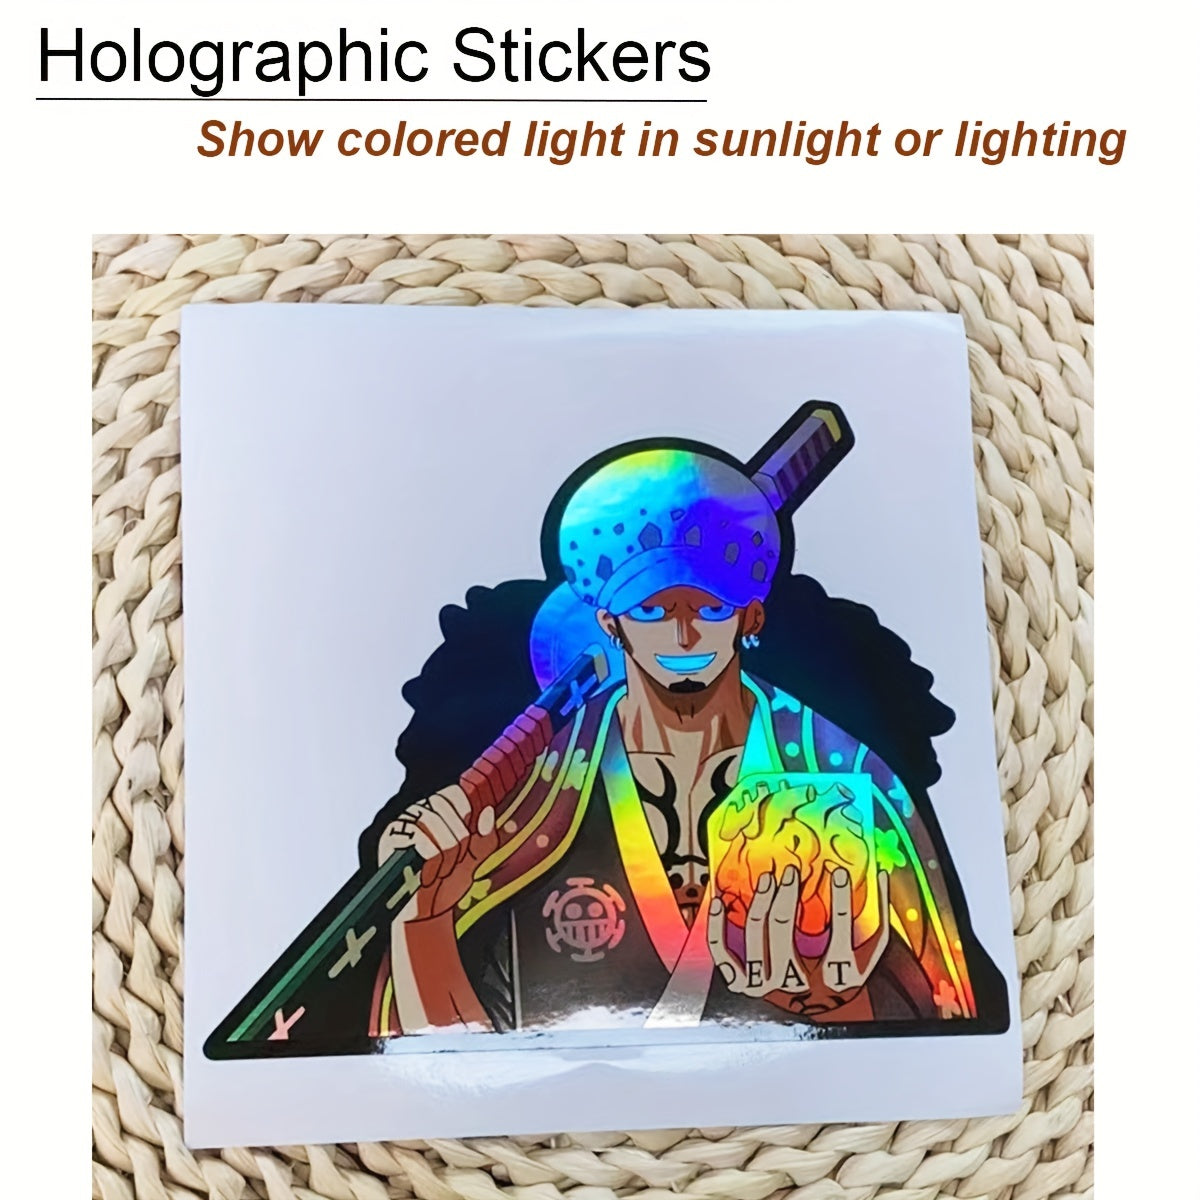 Vibrant Holographic Car Stickers - Waterproof Decals for Cars, Autos, Motorcycles, Laptops, and Bumpers - Colorful Stickers and Unique Peeker Decals for Personalization and Stylish Accessories - Rexpect Nerd